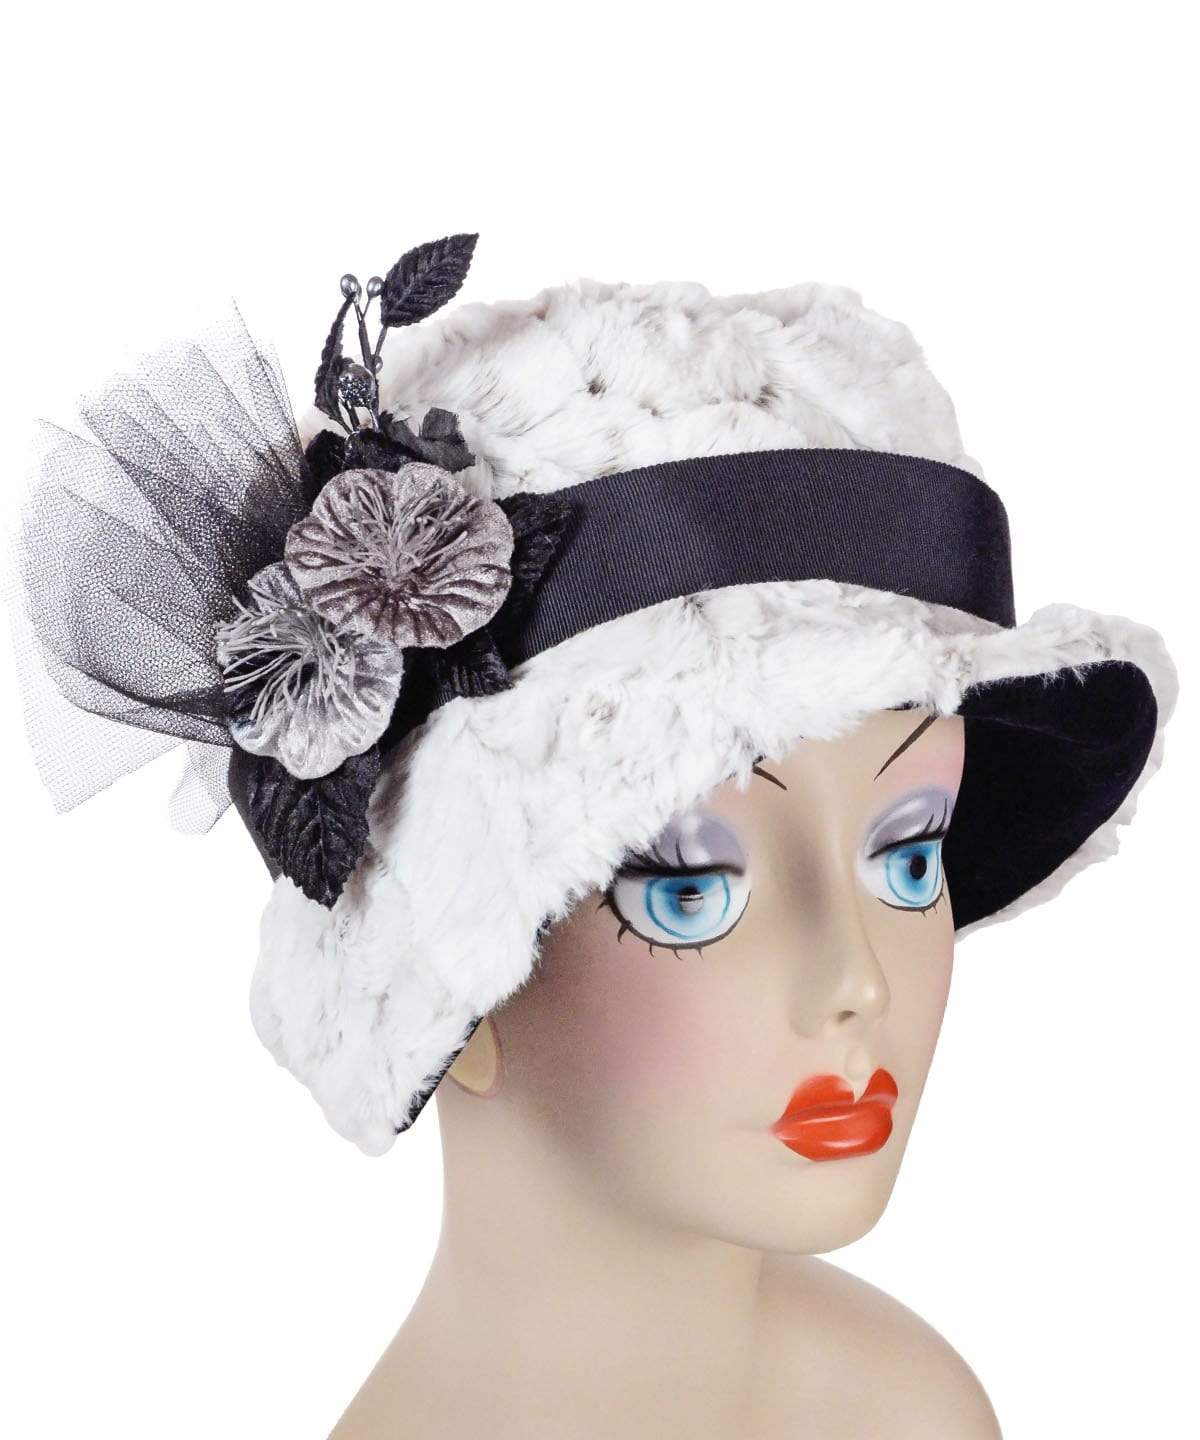 Woman wearing Abigail Hat in Winter’s Frost White Luxury Faux Fur with Black Faux Suede under rim. Trimmed with Black Grosgrain Band and Feathers| Handmade in Seattle WA| Pandemonium Millinery 